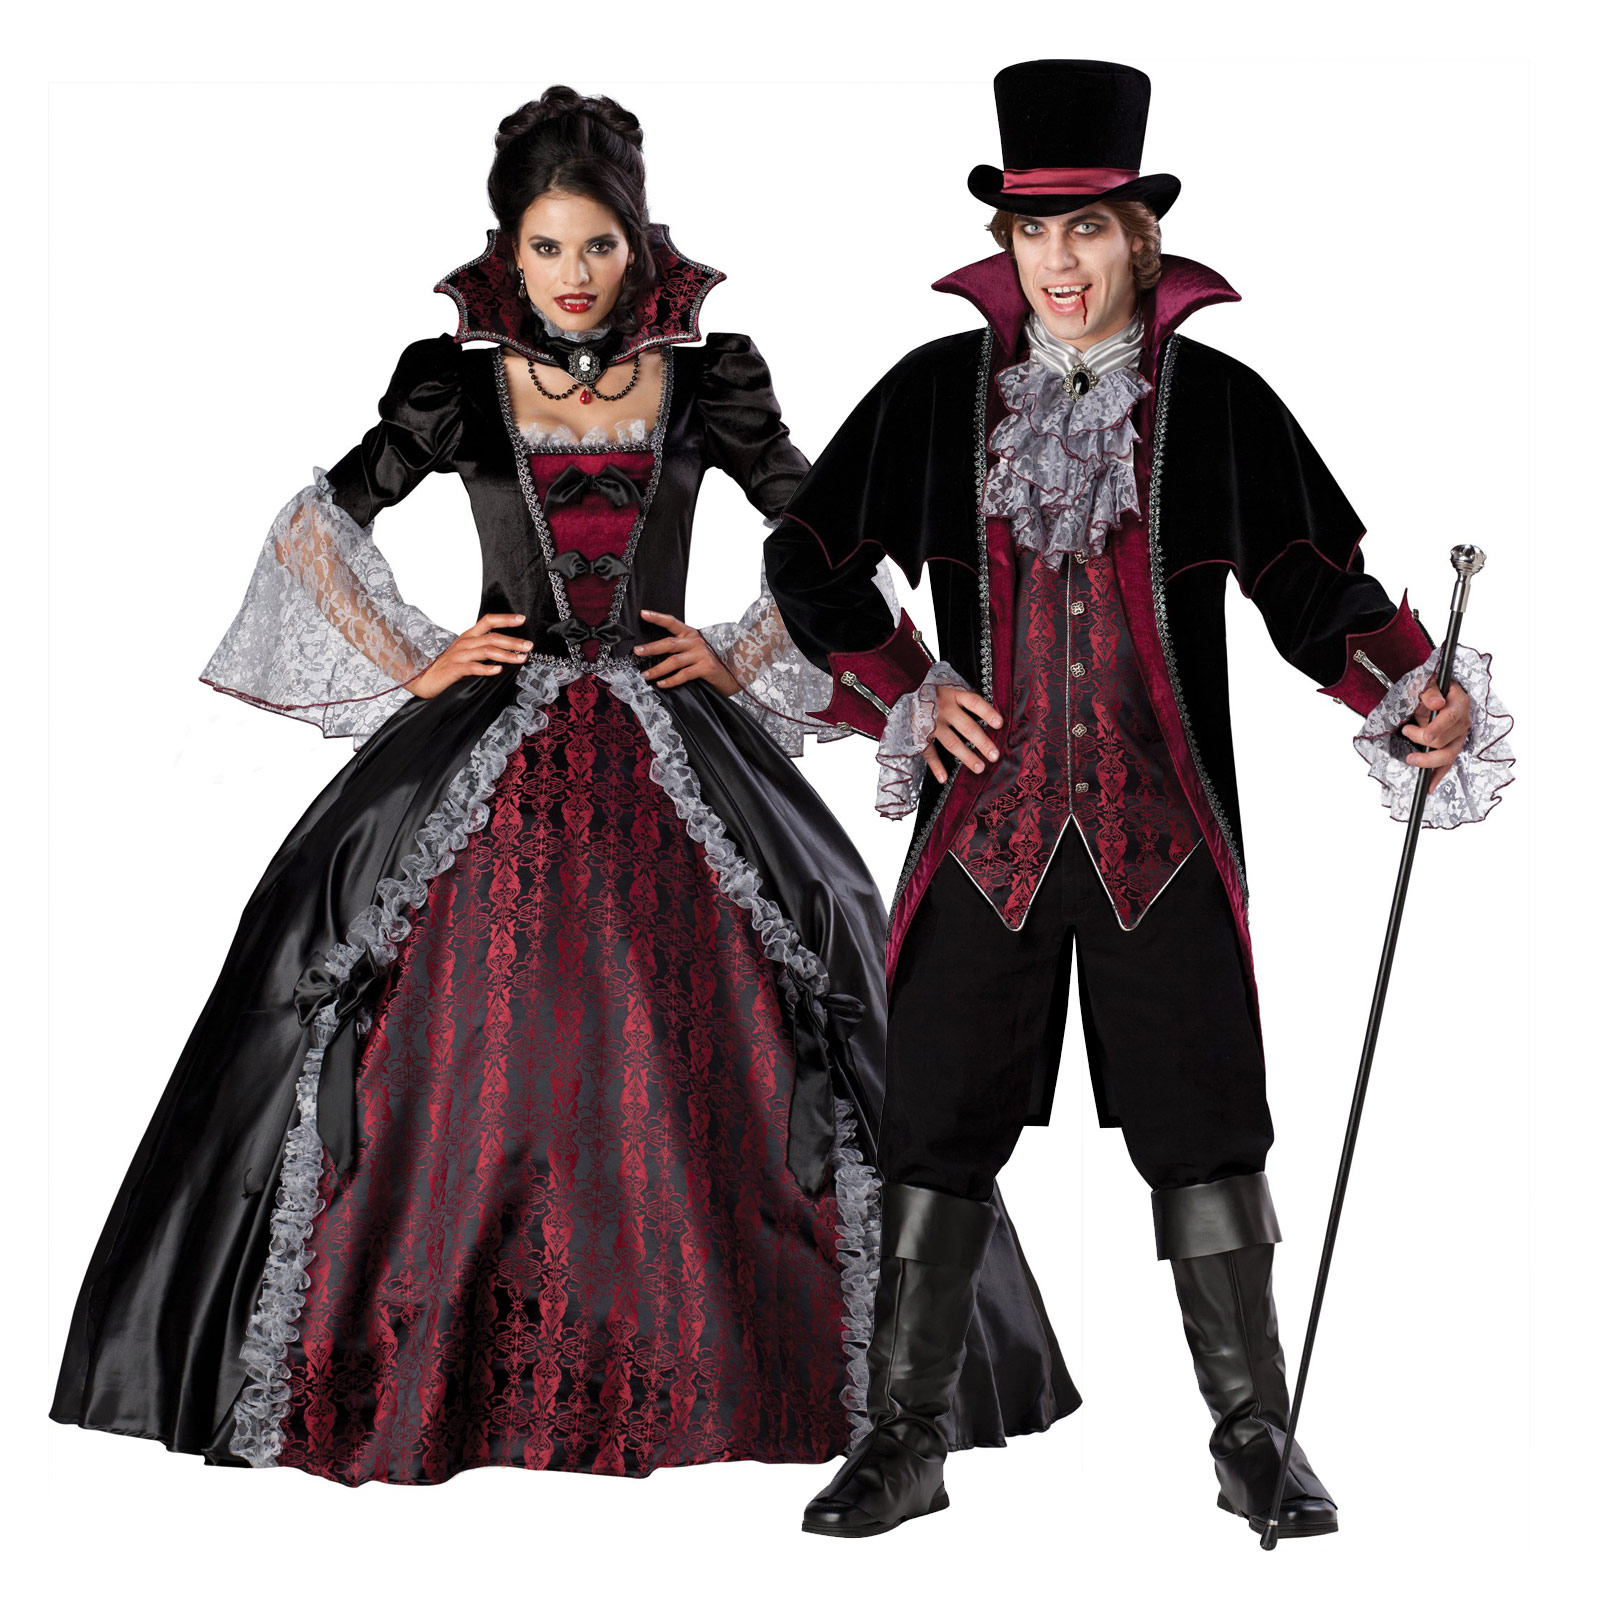 Halloween Costumes Ideas For Couple of Vampire.